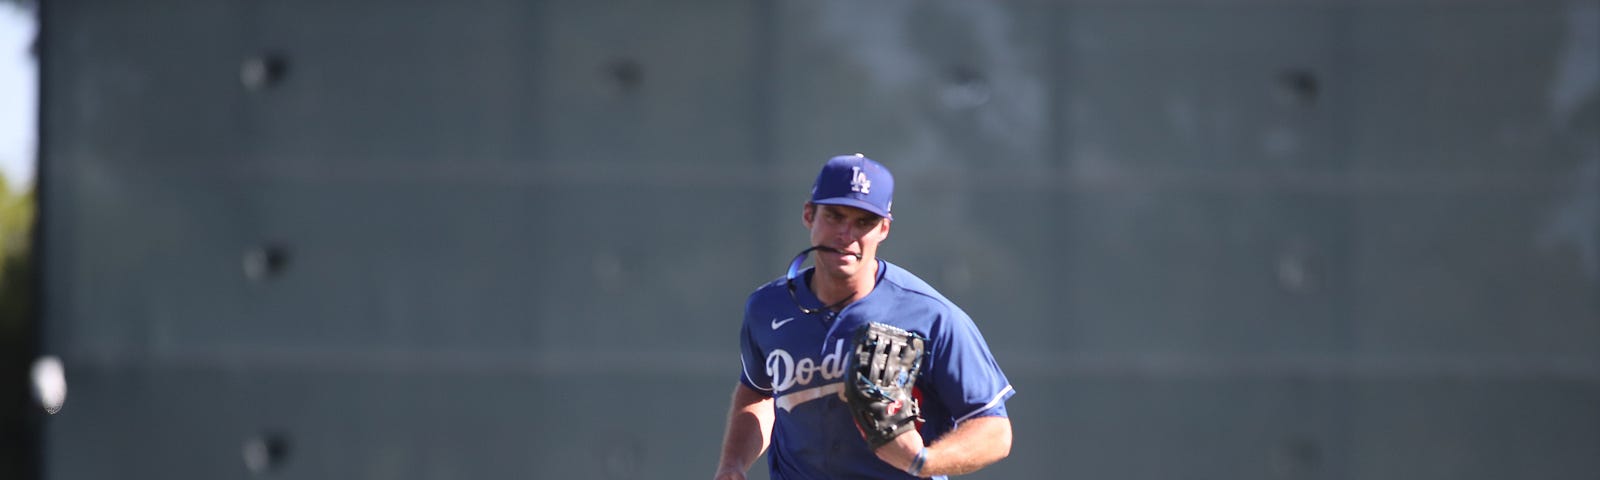 After a special year for Dodger rookies, the farm system offers more  potential big league impact in 2020, by Cary Osborne